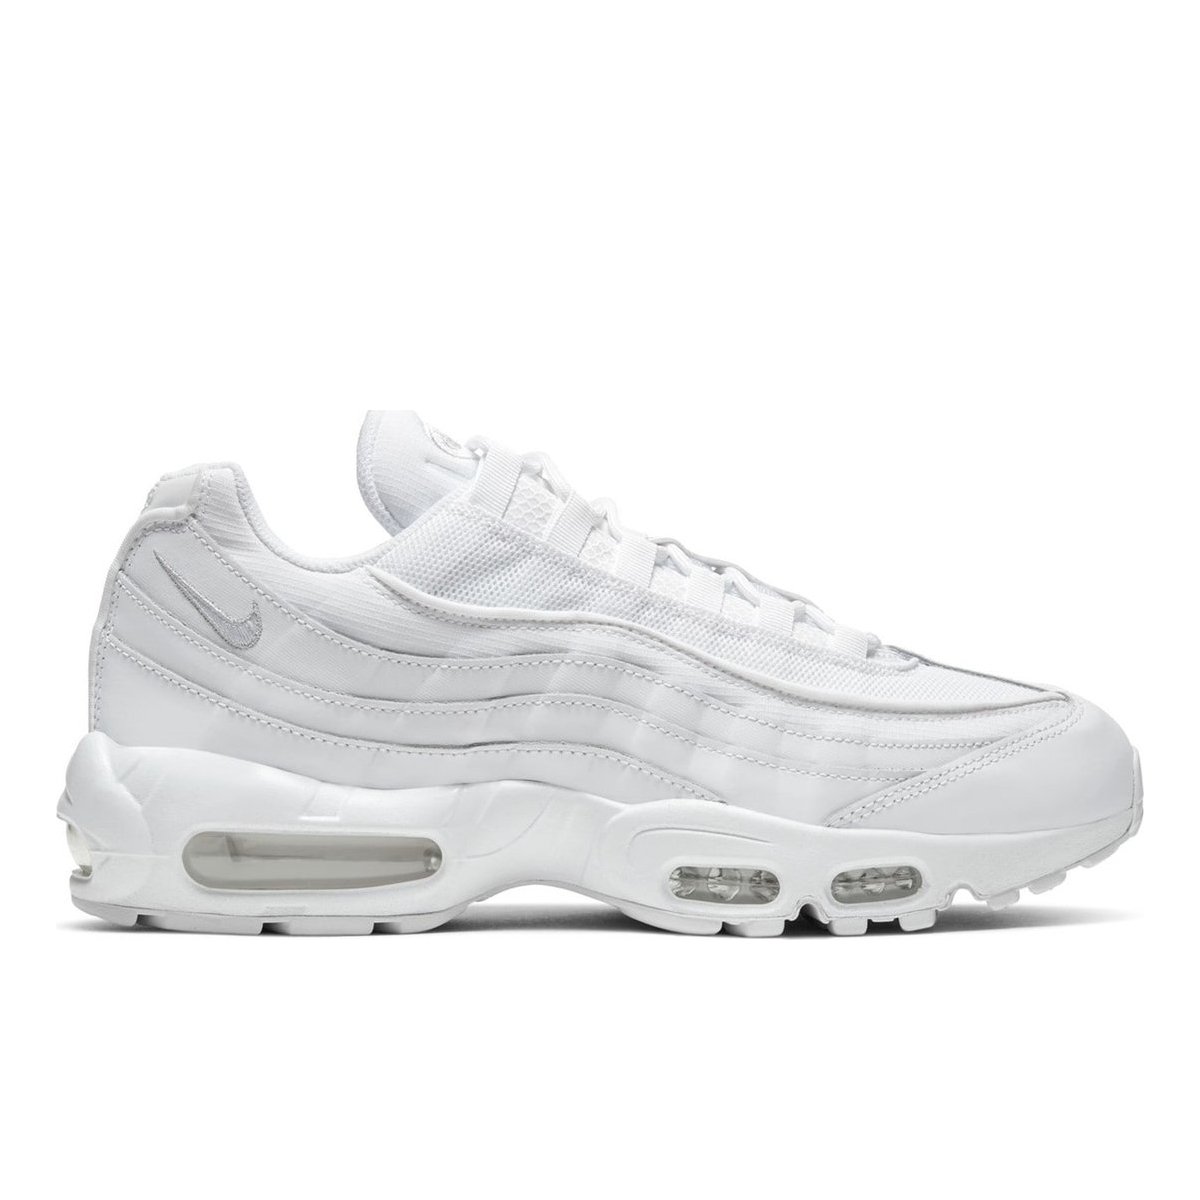 Size 12 Nike Nike Air Max 95 Essential Shoes Mens trainers